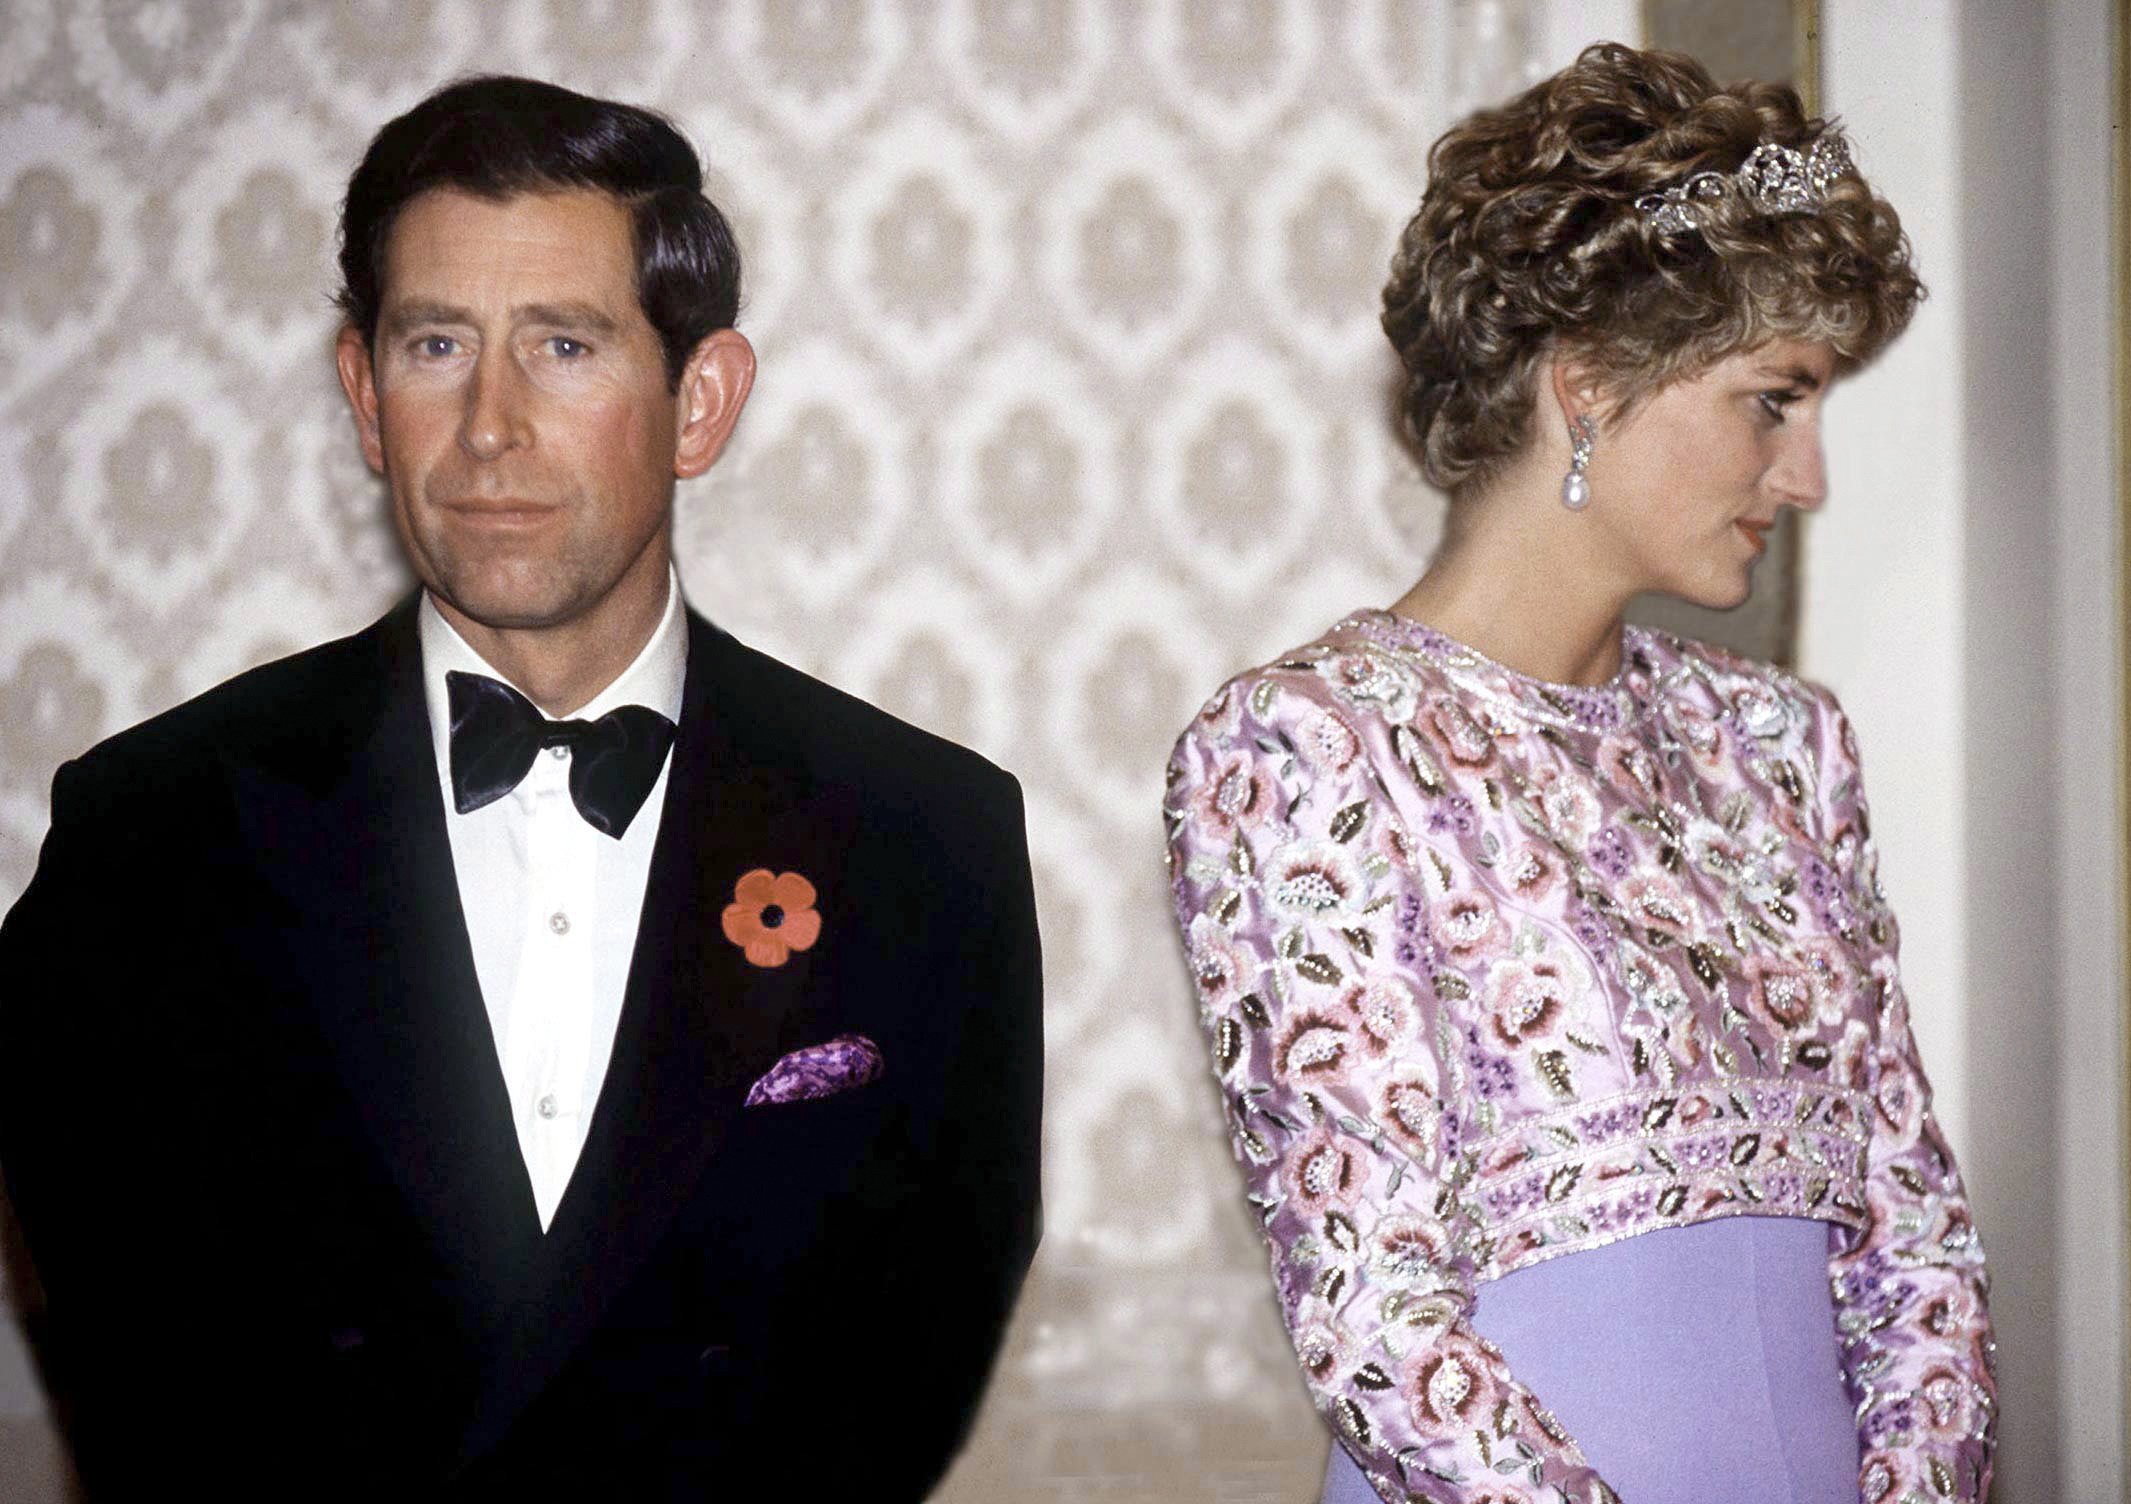 Prince Charles and Princess Diana on their last official trip together - A visit to the Republic of Korea (South Korea) | Photo: Getty Images